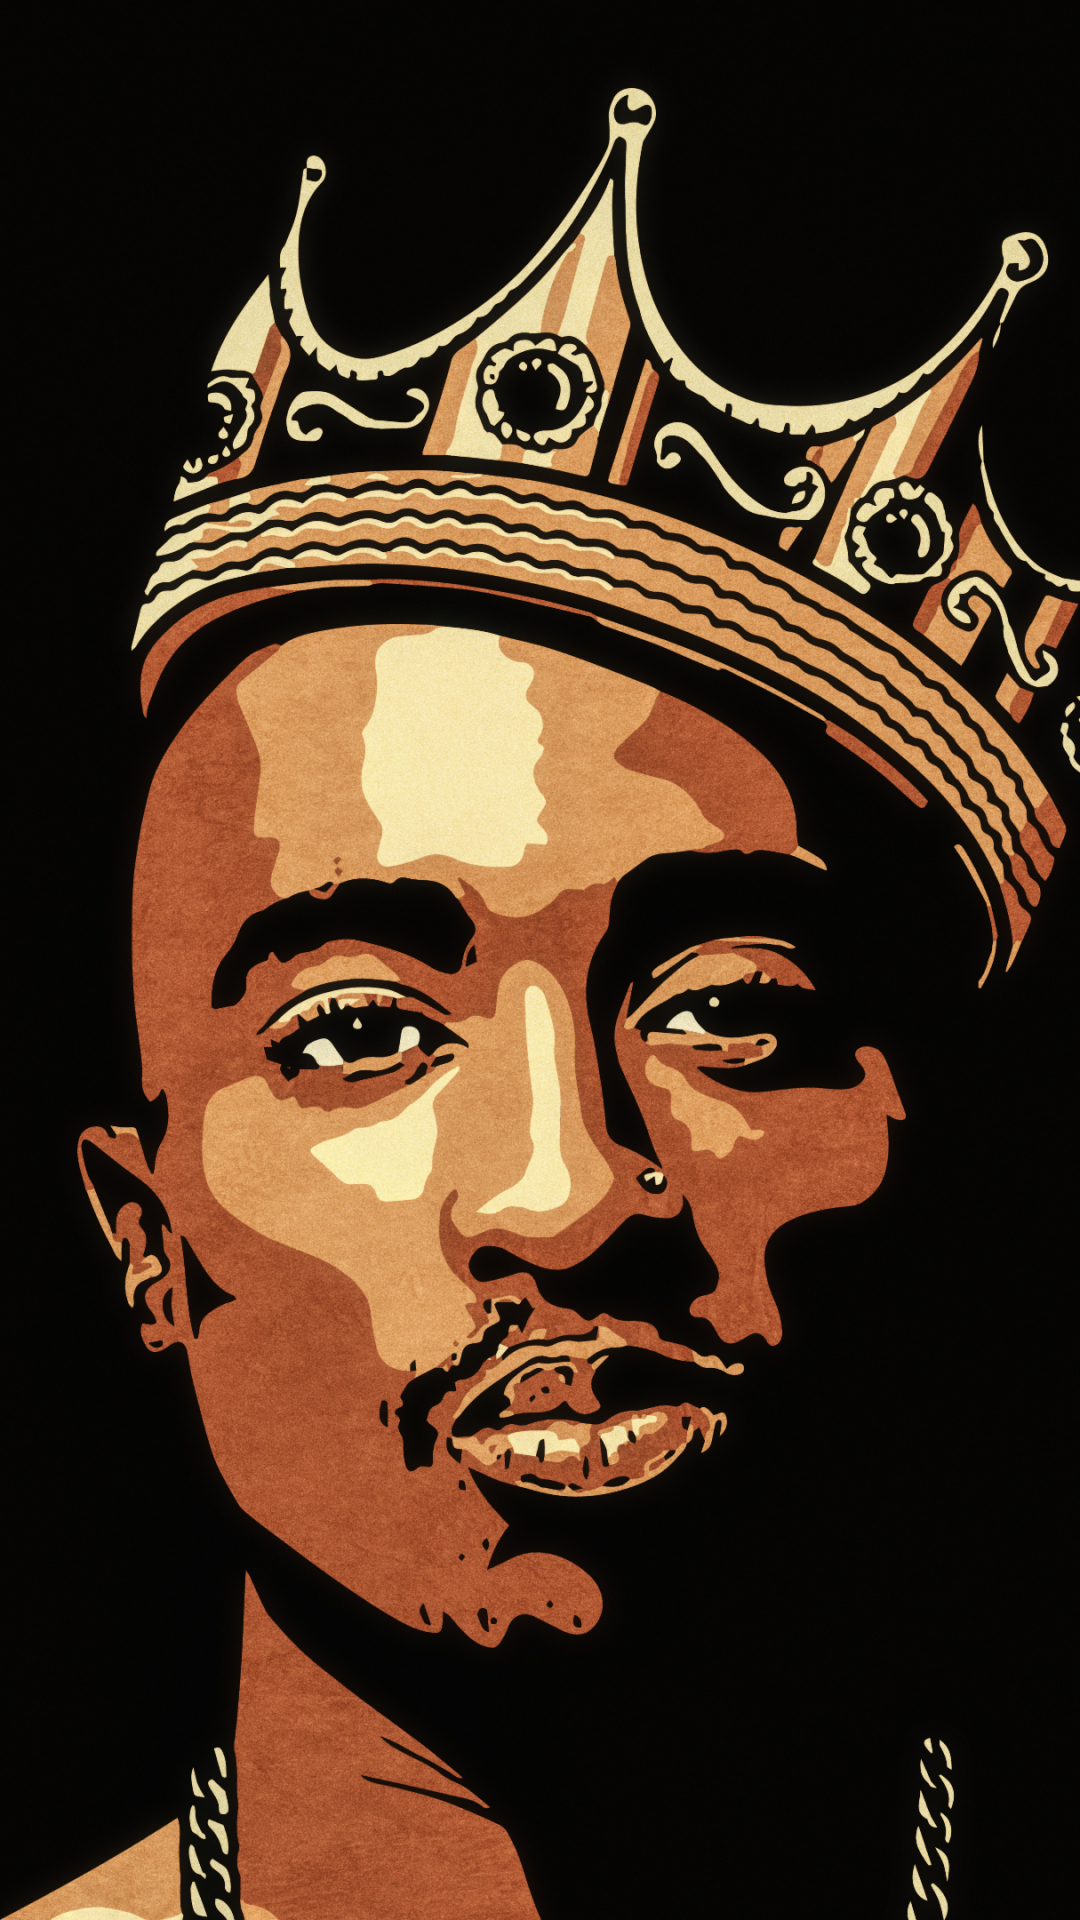 Cartoon Trippy Tupac Wallpaper : Check out our trippy wallpaper